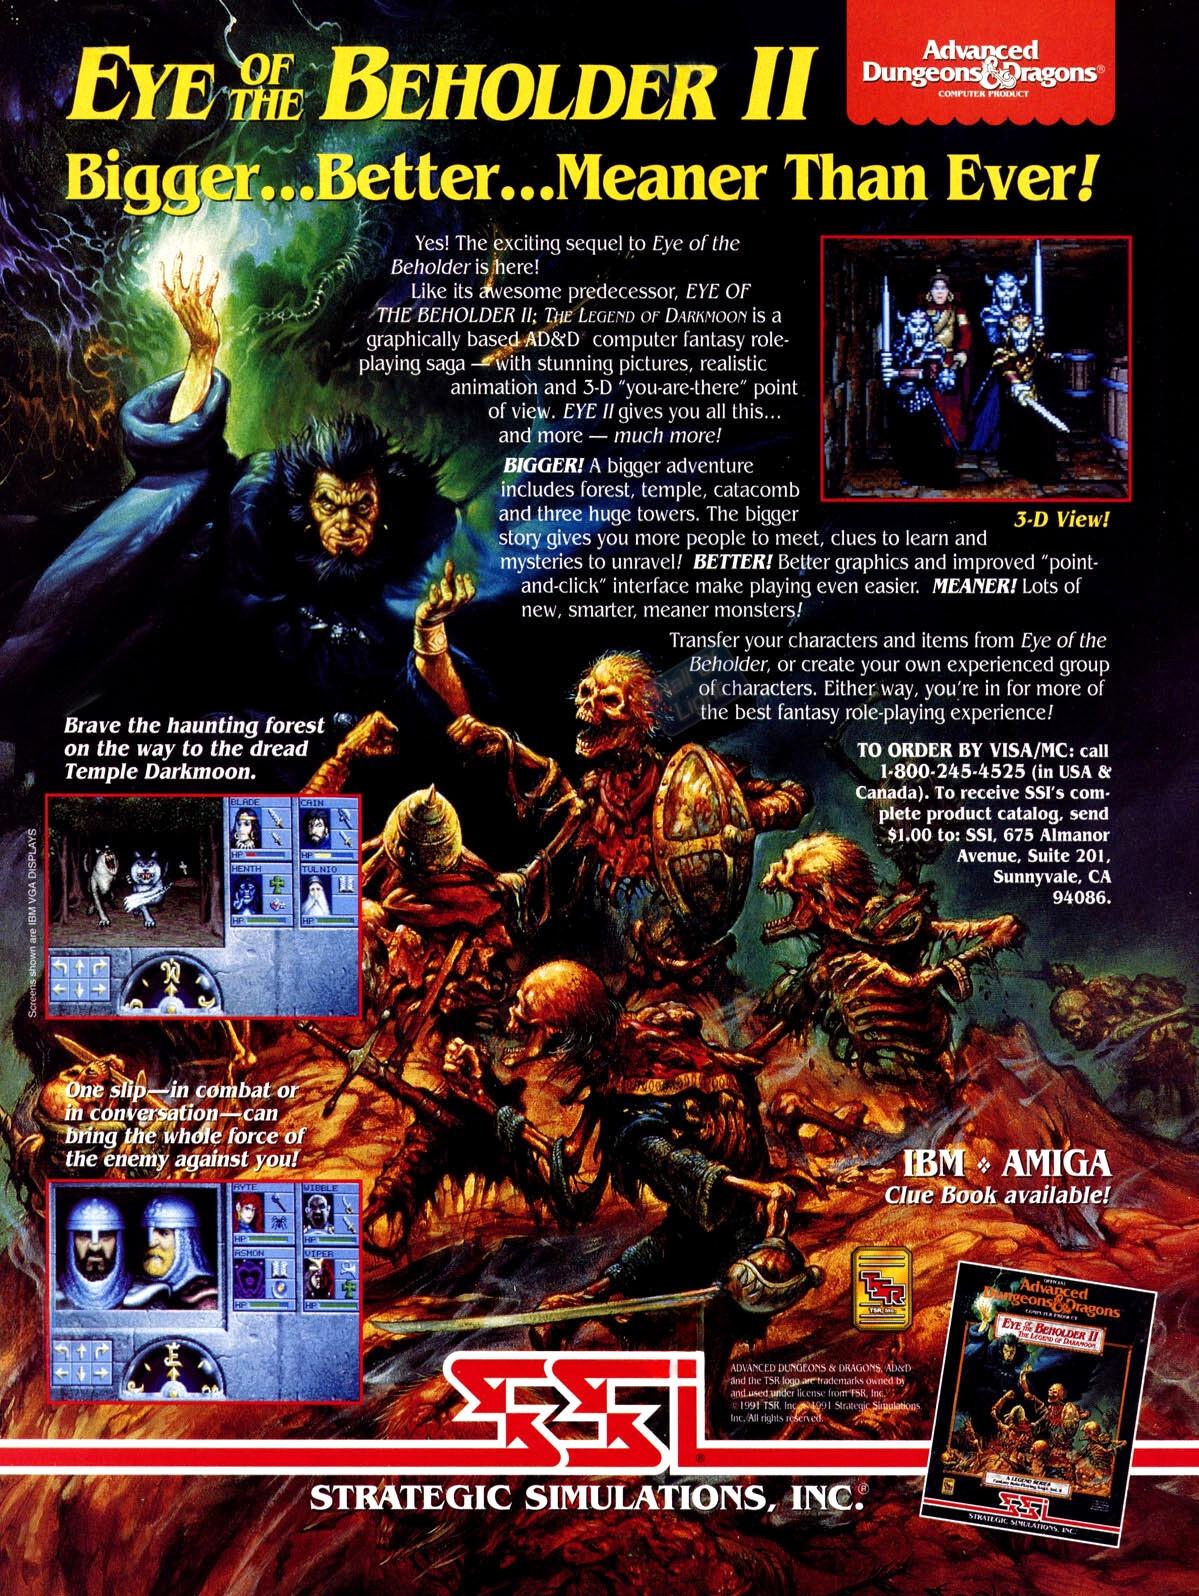 Test up on of the Beholder II (2): The Tale of Darkmoon – videogames advert within the early ’90s (Amiga, FM Cities, PC-98, PC)